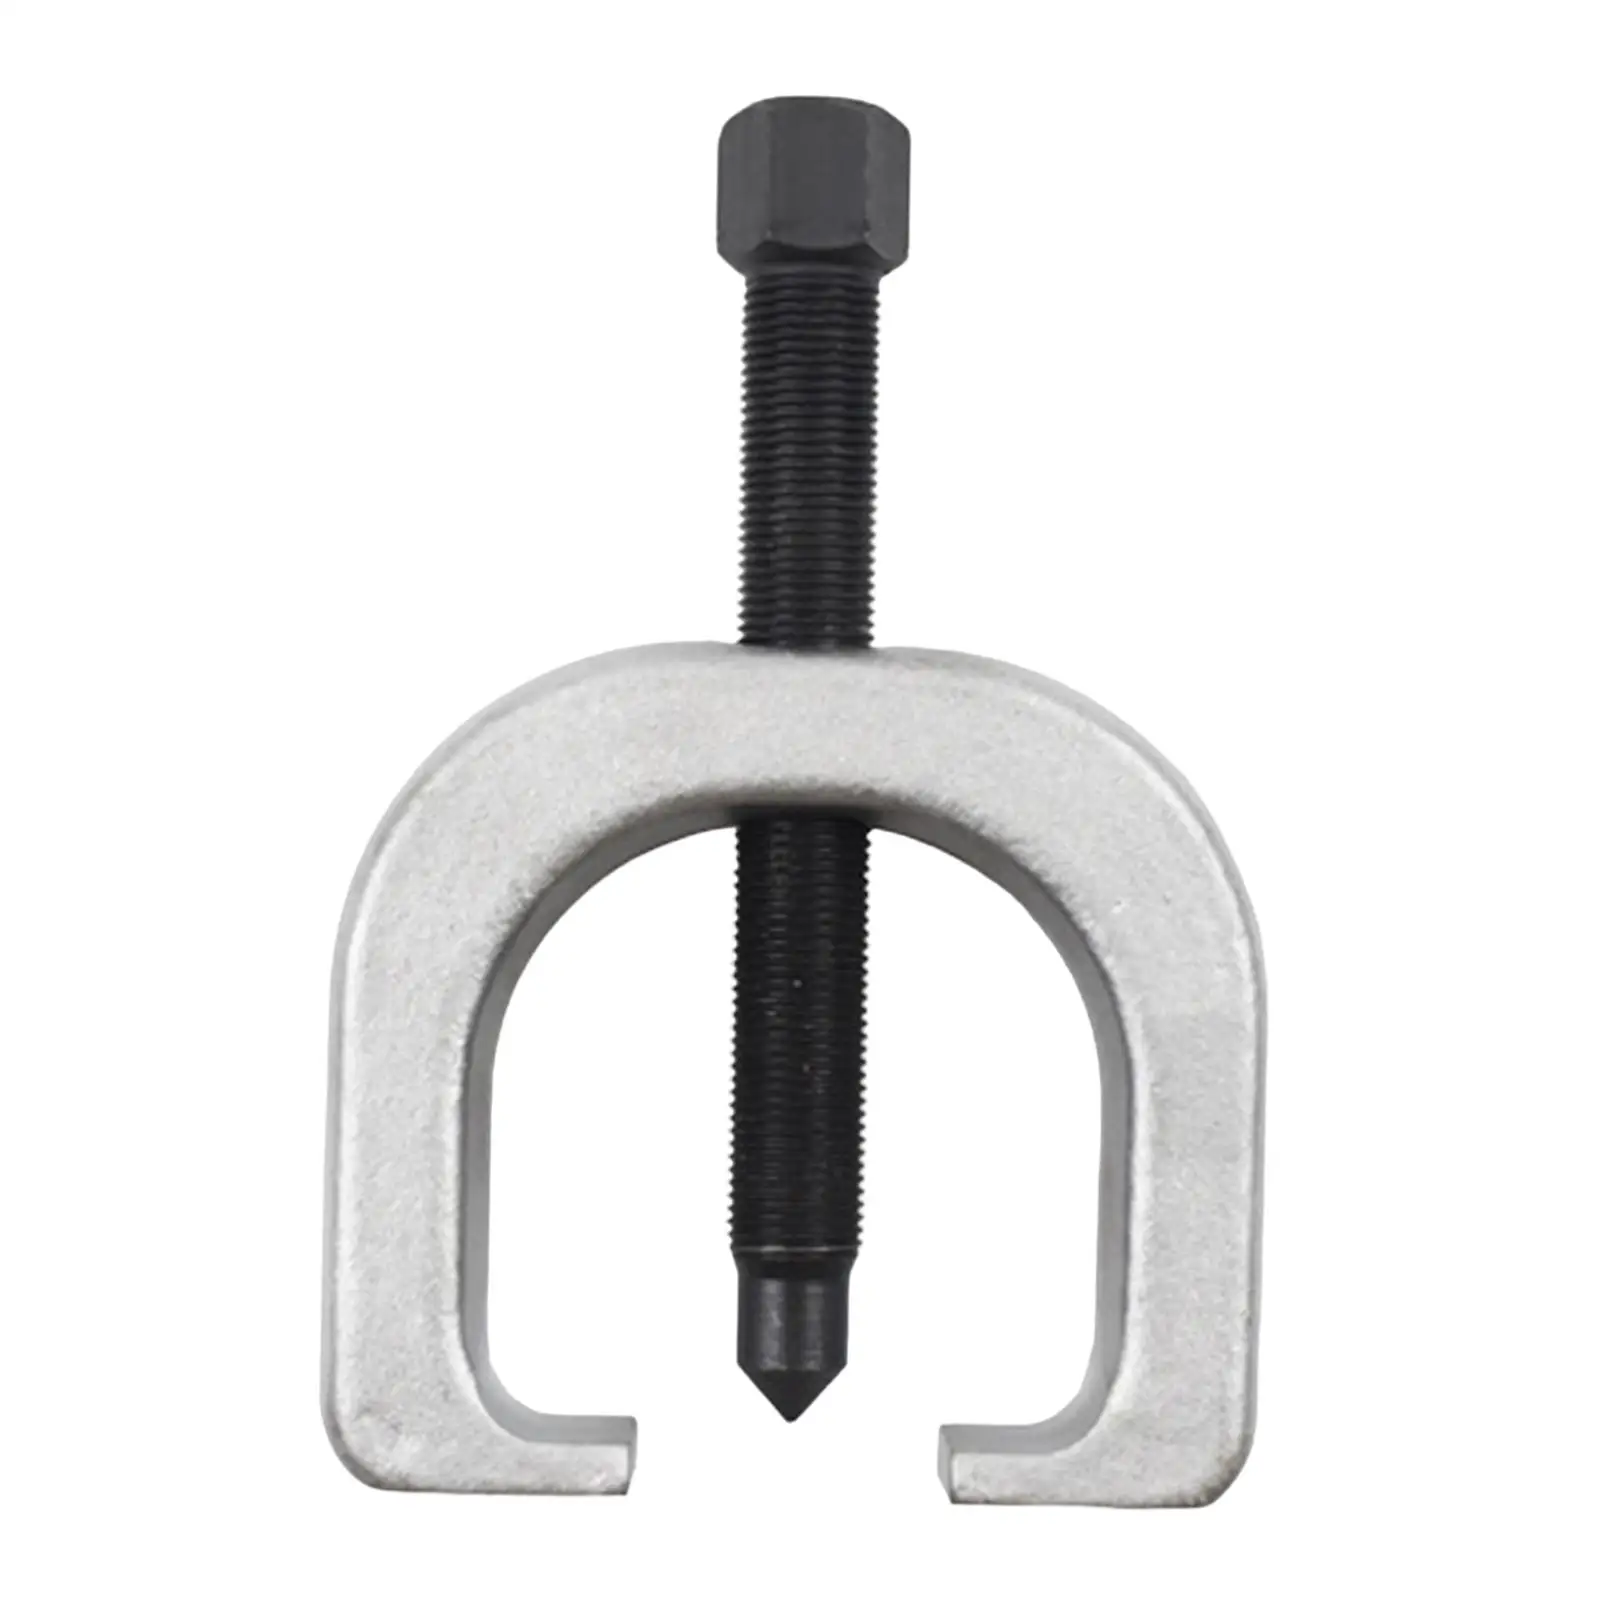 Slack Adjuster Puller Compact Professional Carbon Steel Heavy Duty Sturdy Removal Tool Repair Tool for Trailers Trucks